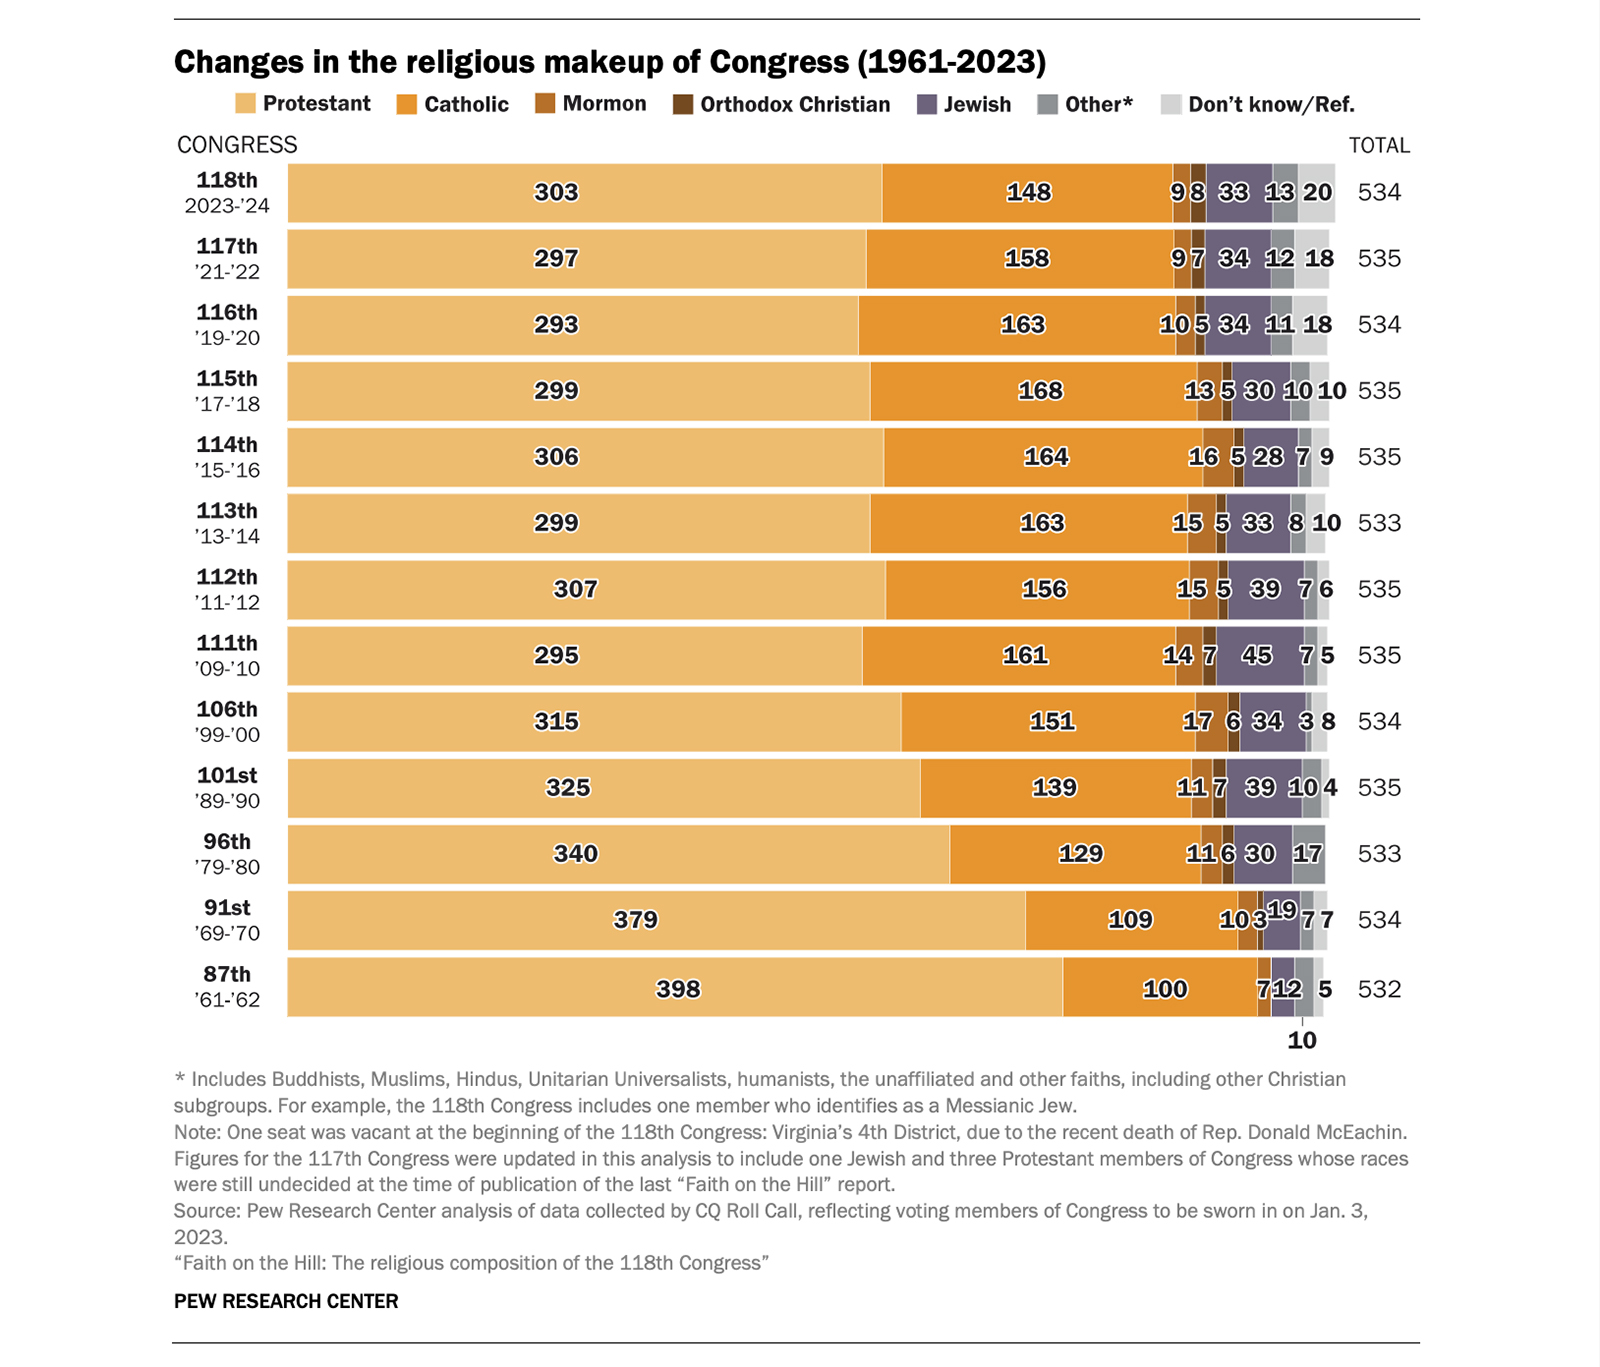 "Changes in the religious makeup of Congress (1961-2023)" Graphic courtesy of Pew Research Center